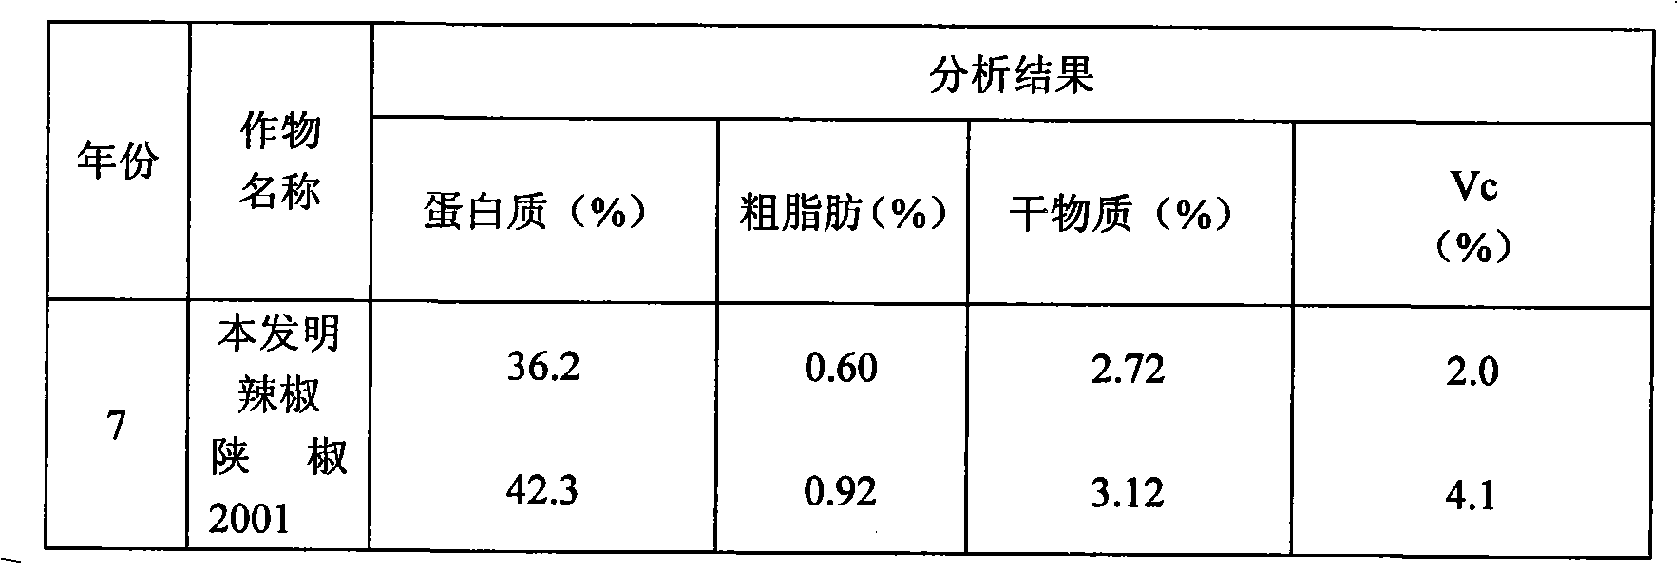 Rapid purifying and selecting method of chili pepper filial generation